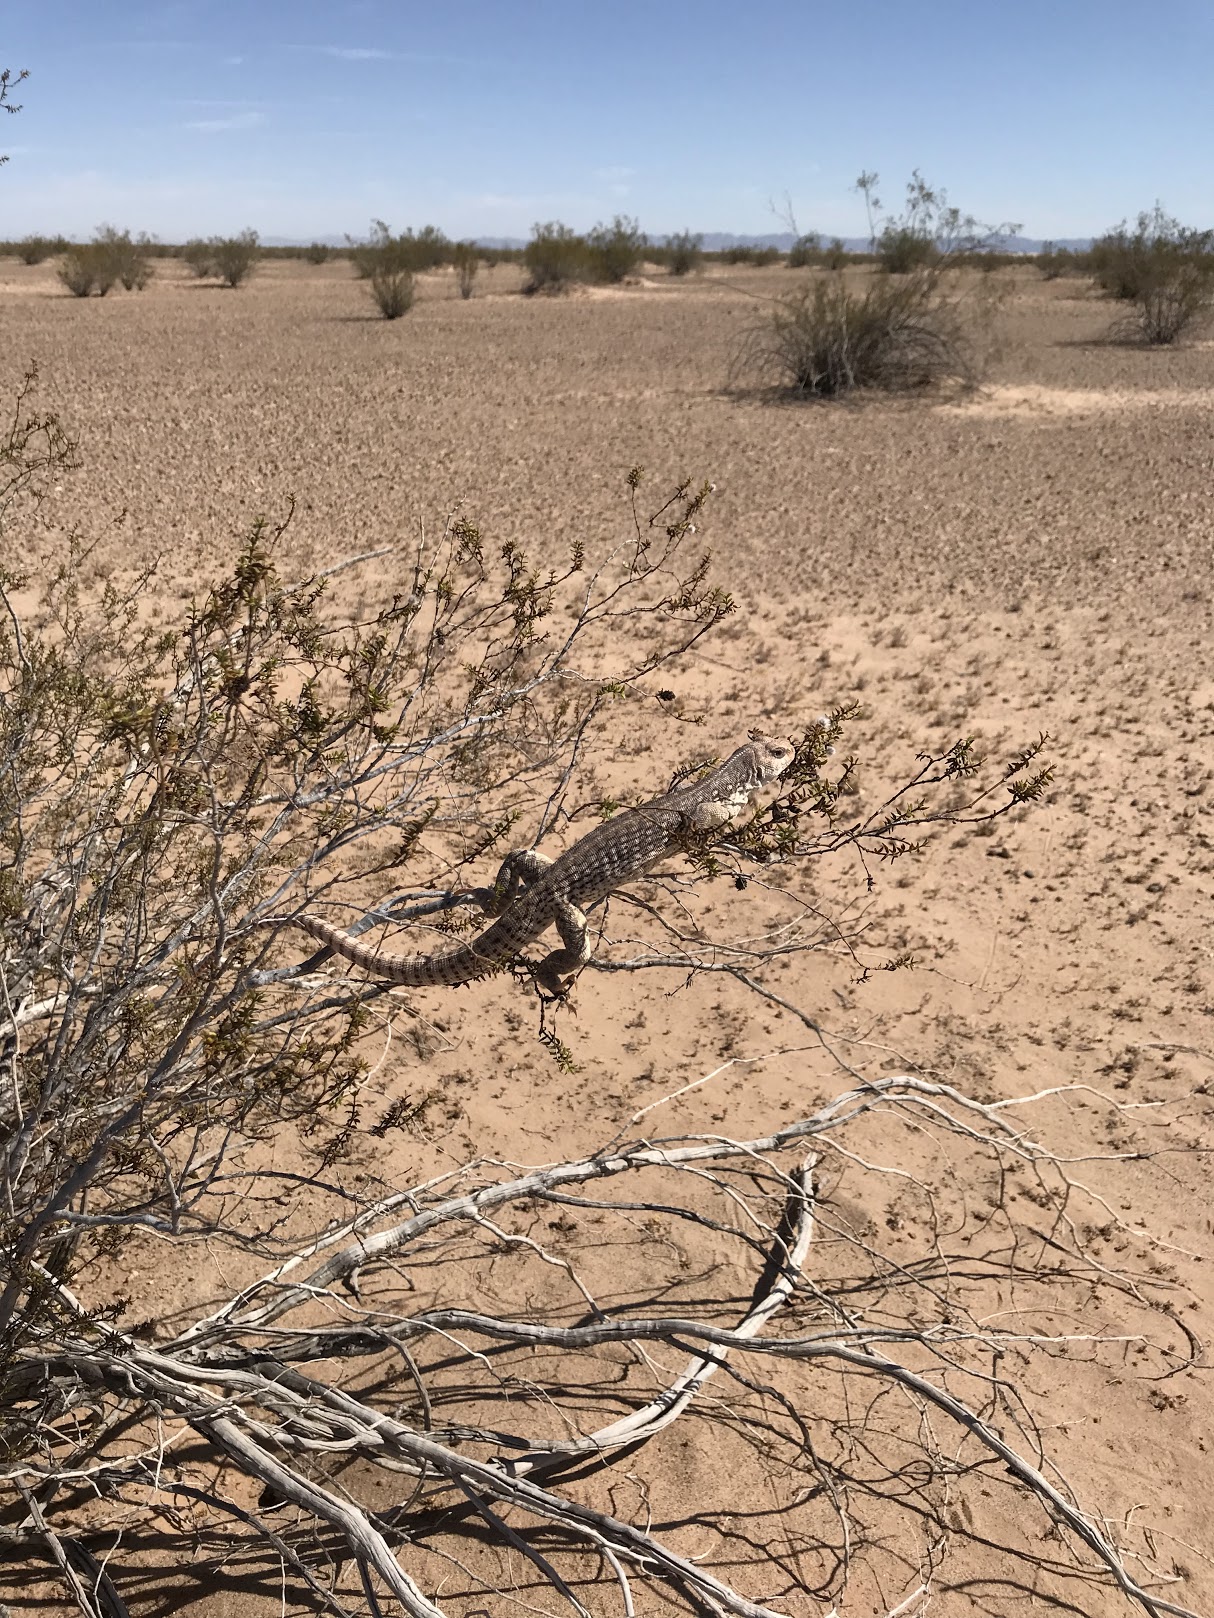 This iguana has a unique strategy to avoid the hot desert floor.